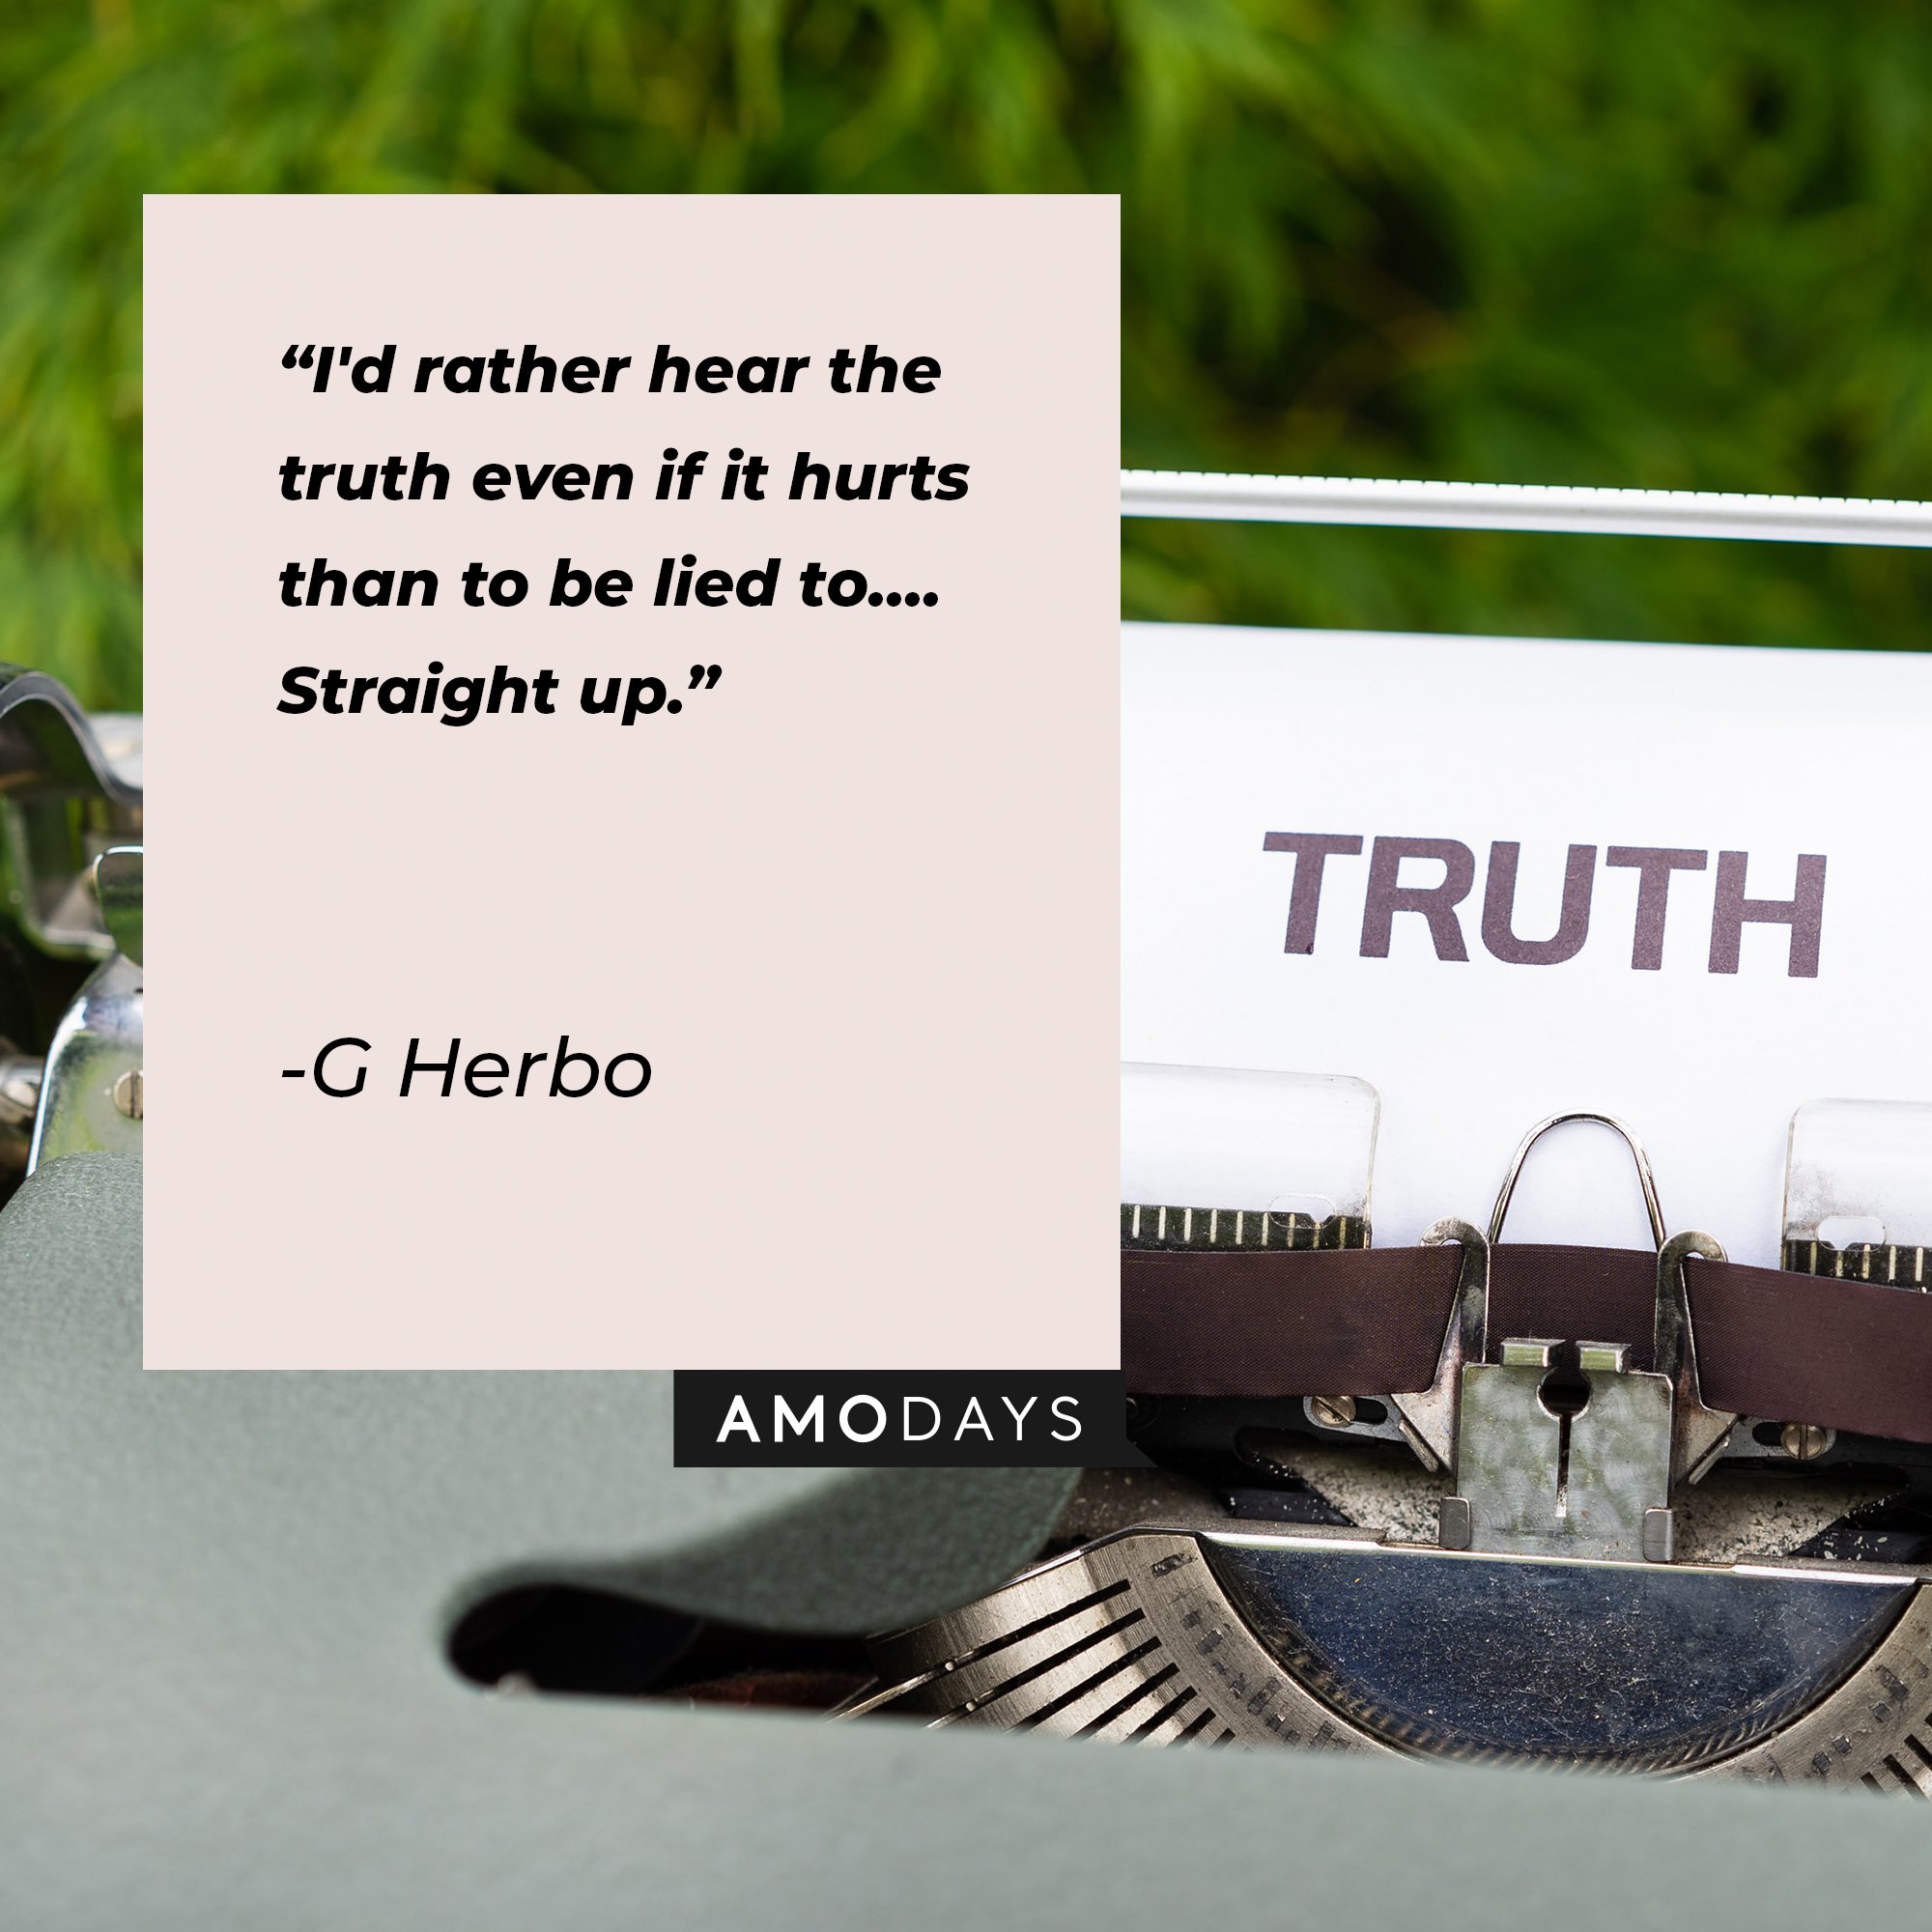 G Herbo’s quote: "I'd rather hear the truth even if it hurts than to be lied to…. Straight up." | Image: AmoDays  